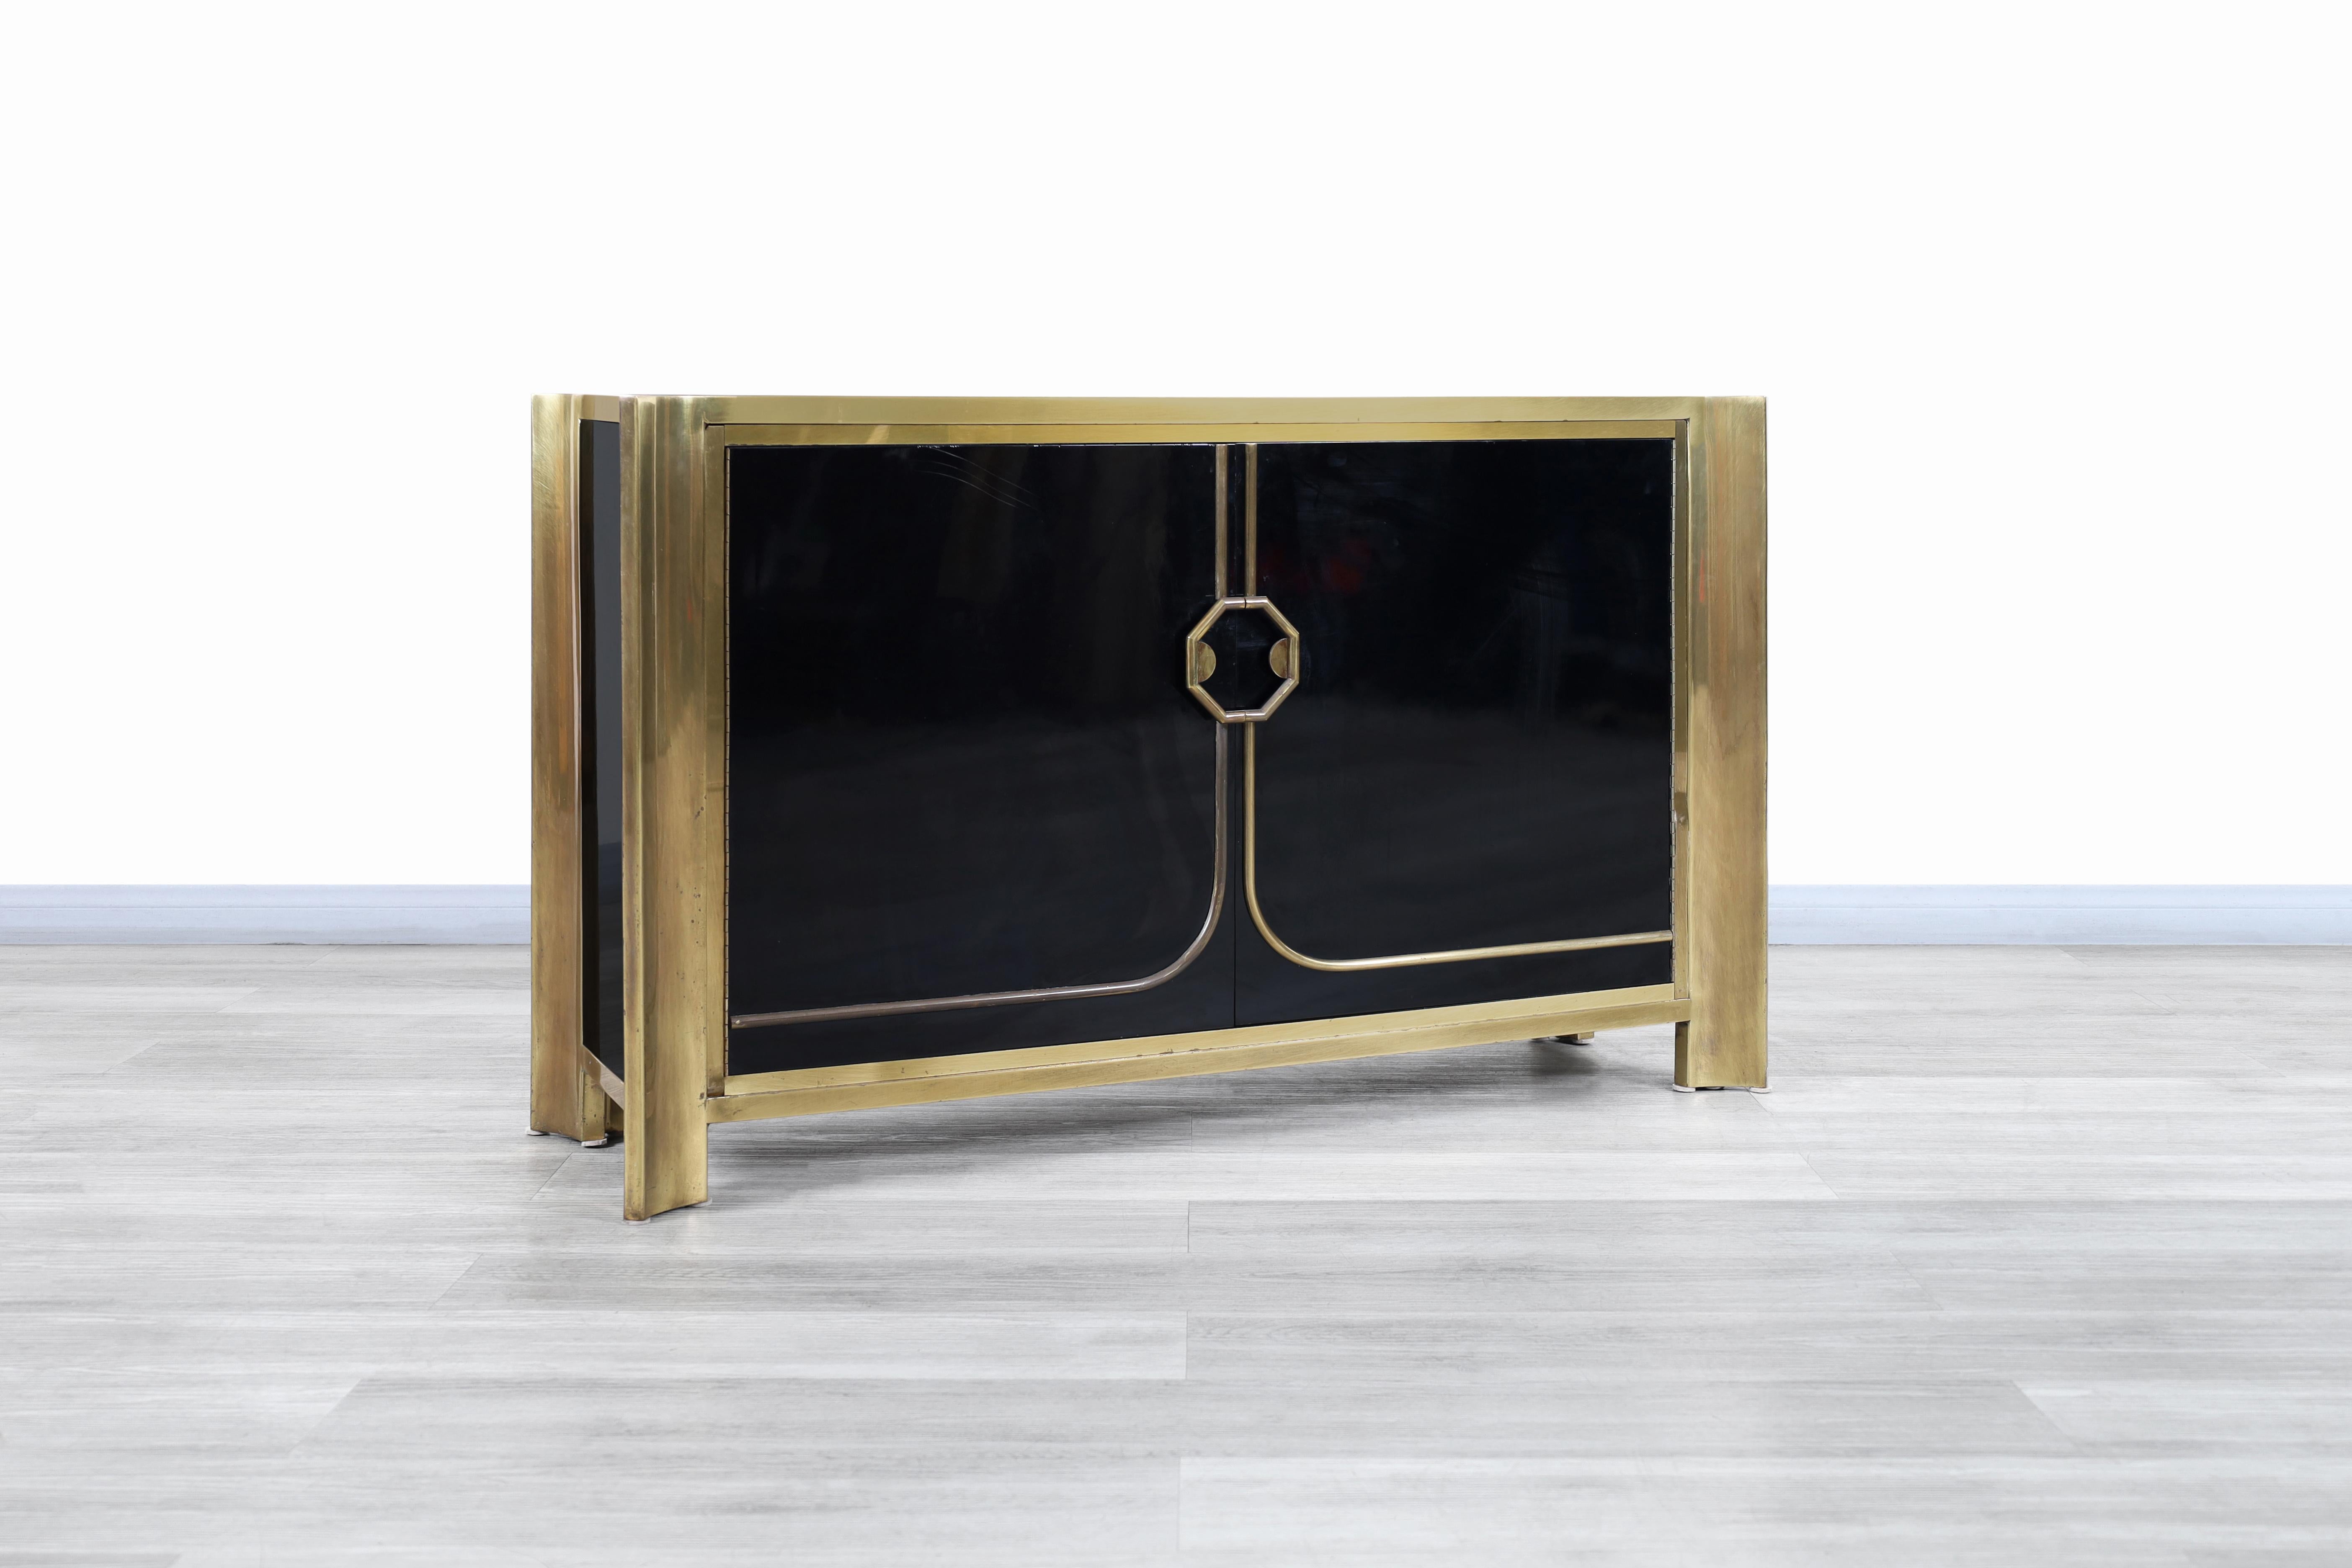 Beautiful vintage patinated brass credenza designed by Mastercraft in the United States, circa 1970s. This credenza has a timeless design where the materials used for its construction and the subtlety of the details that adorn the structure stand